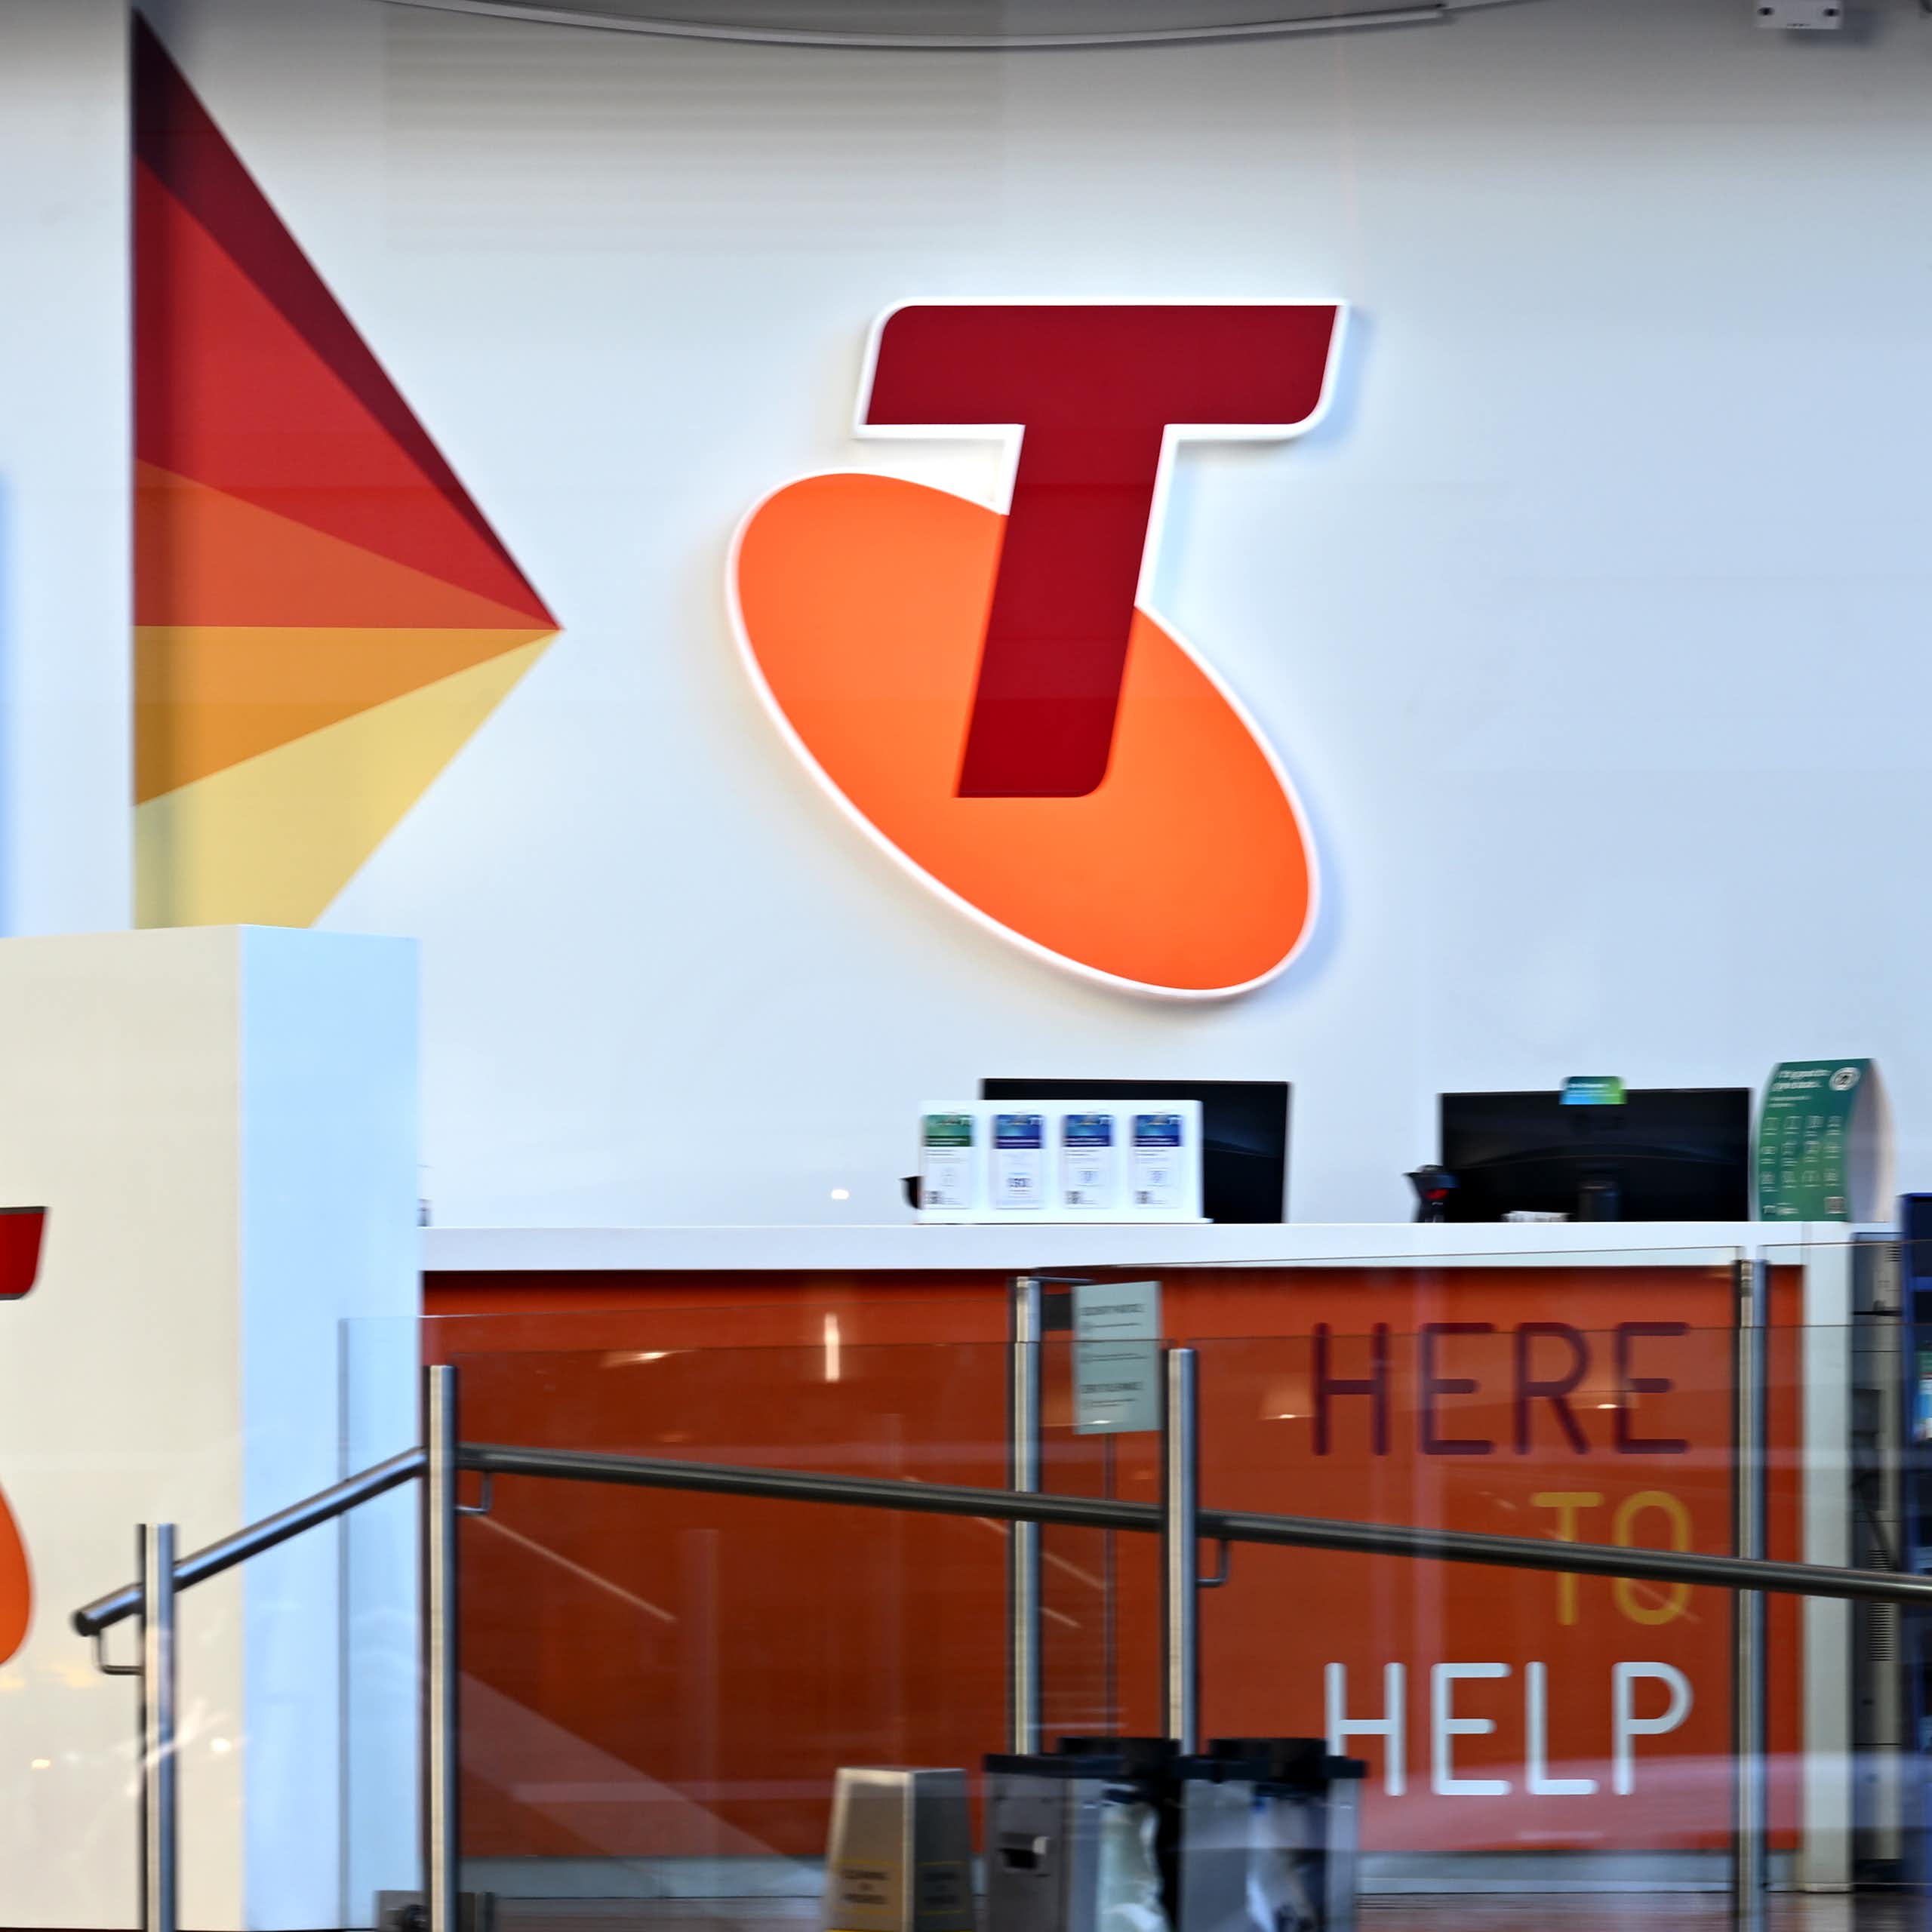 Blurred man seen walking in front of a large Telstra shop